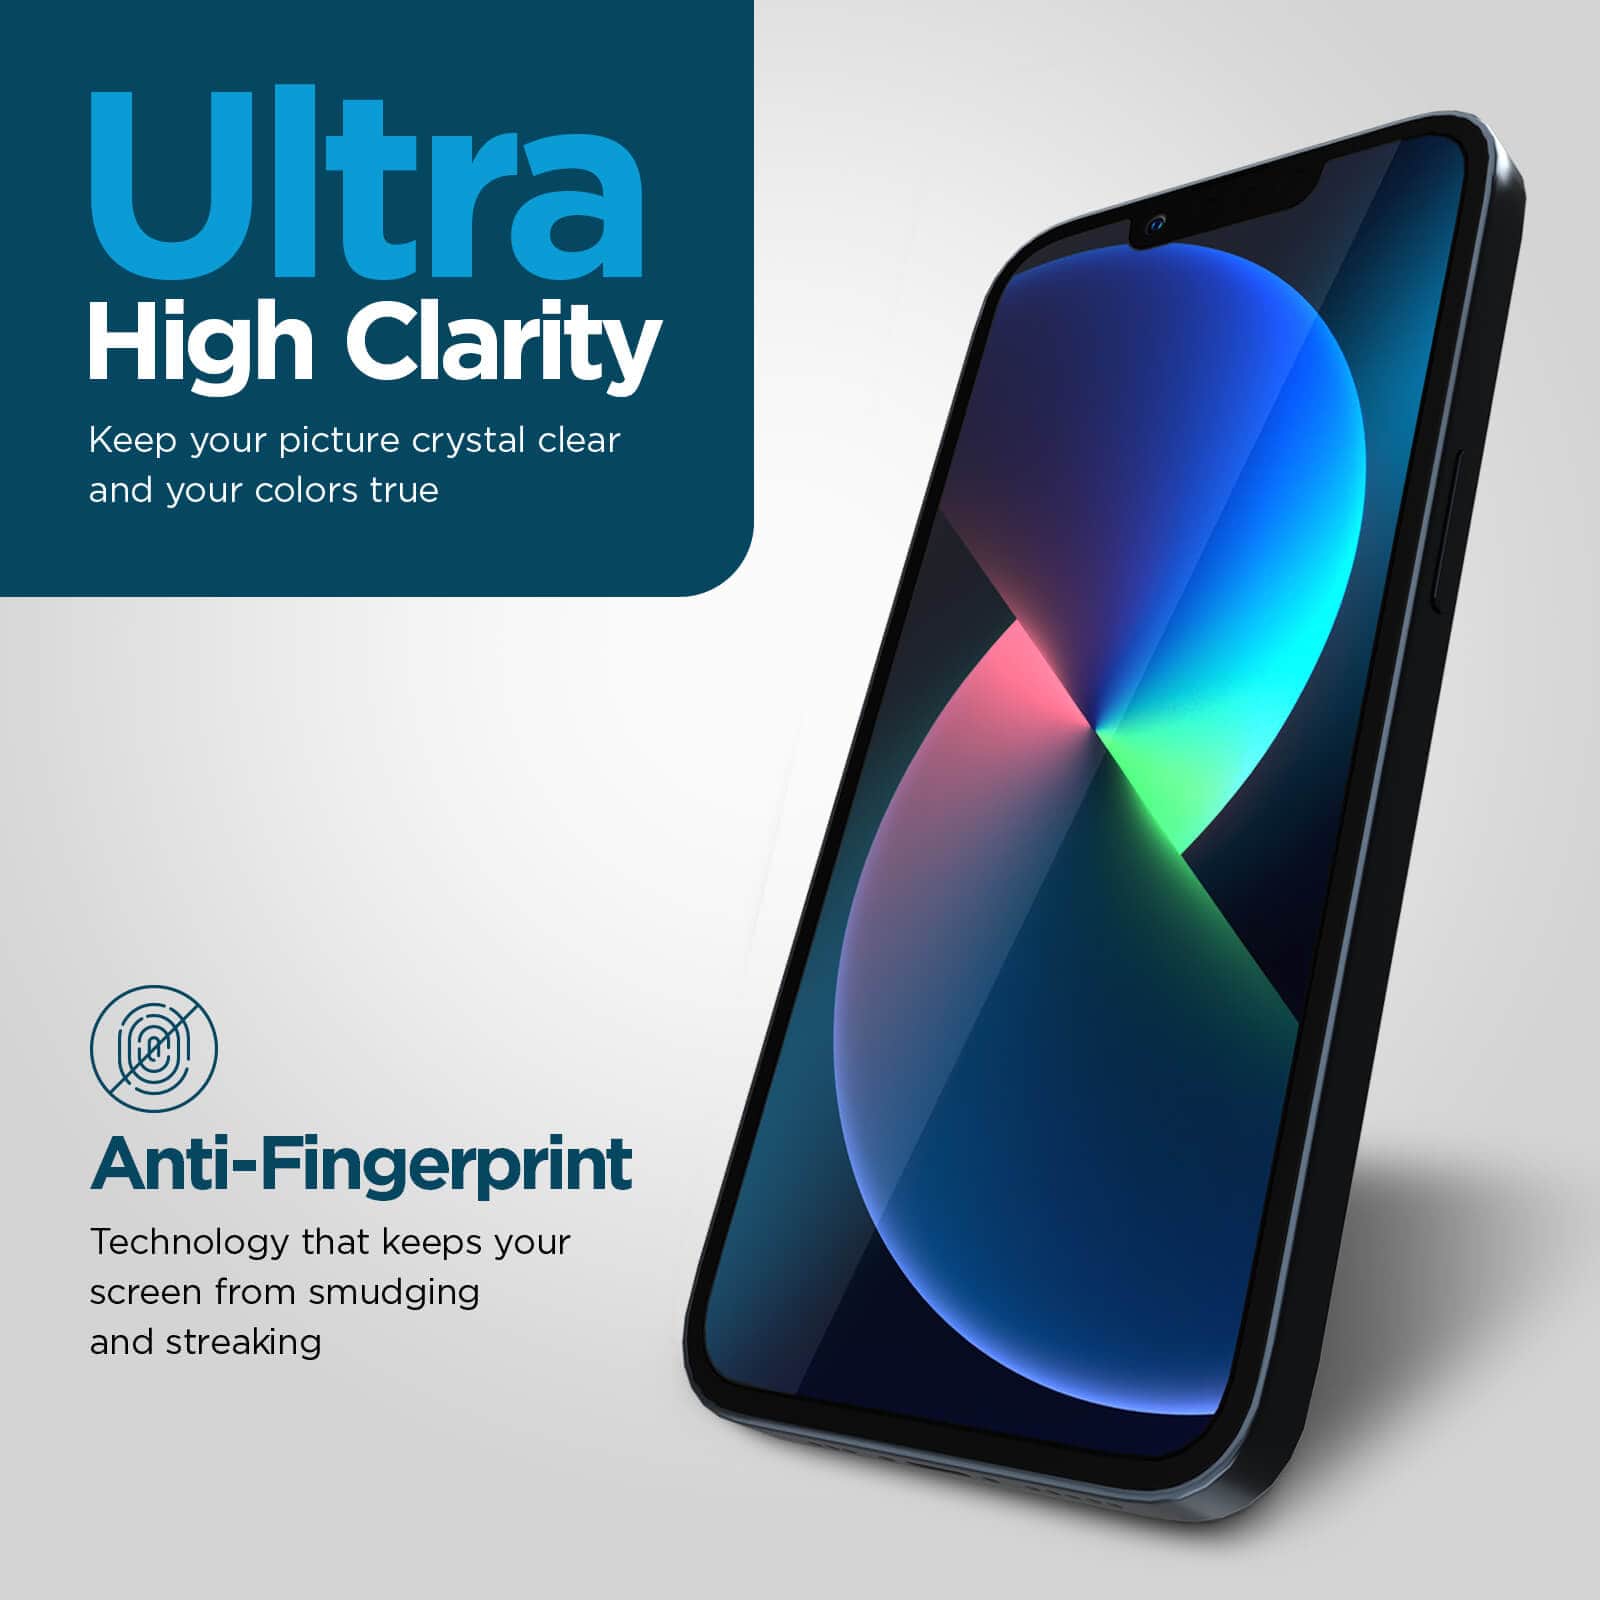 Ultra high clarity. Keeps your picture crystal clear and your colors true. Anti0Fingerprint technology that keeps your screen from smudging and streaking. color::Clear